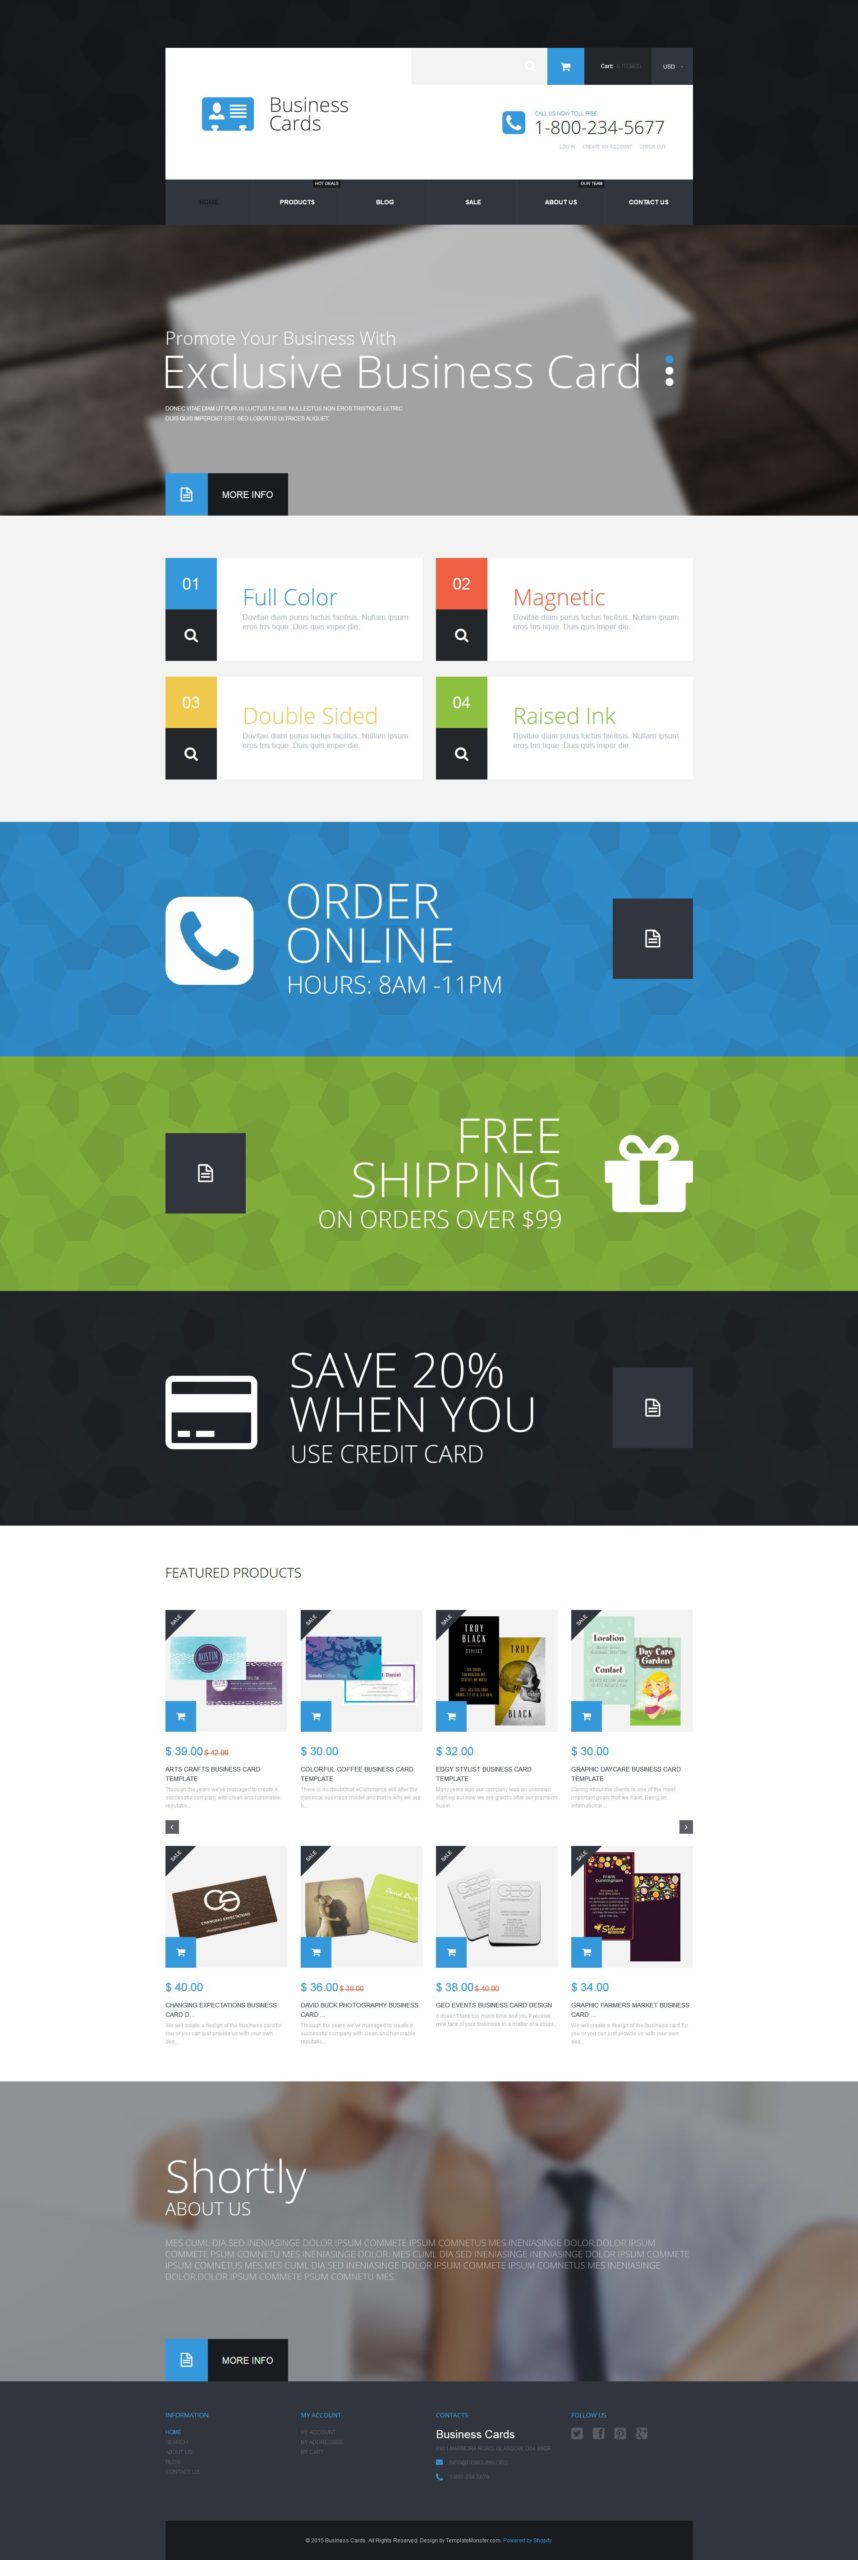 shopify business cards 2